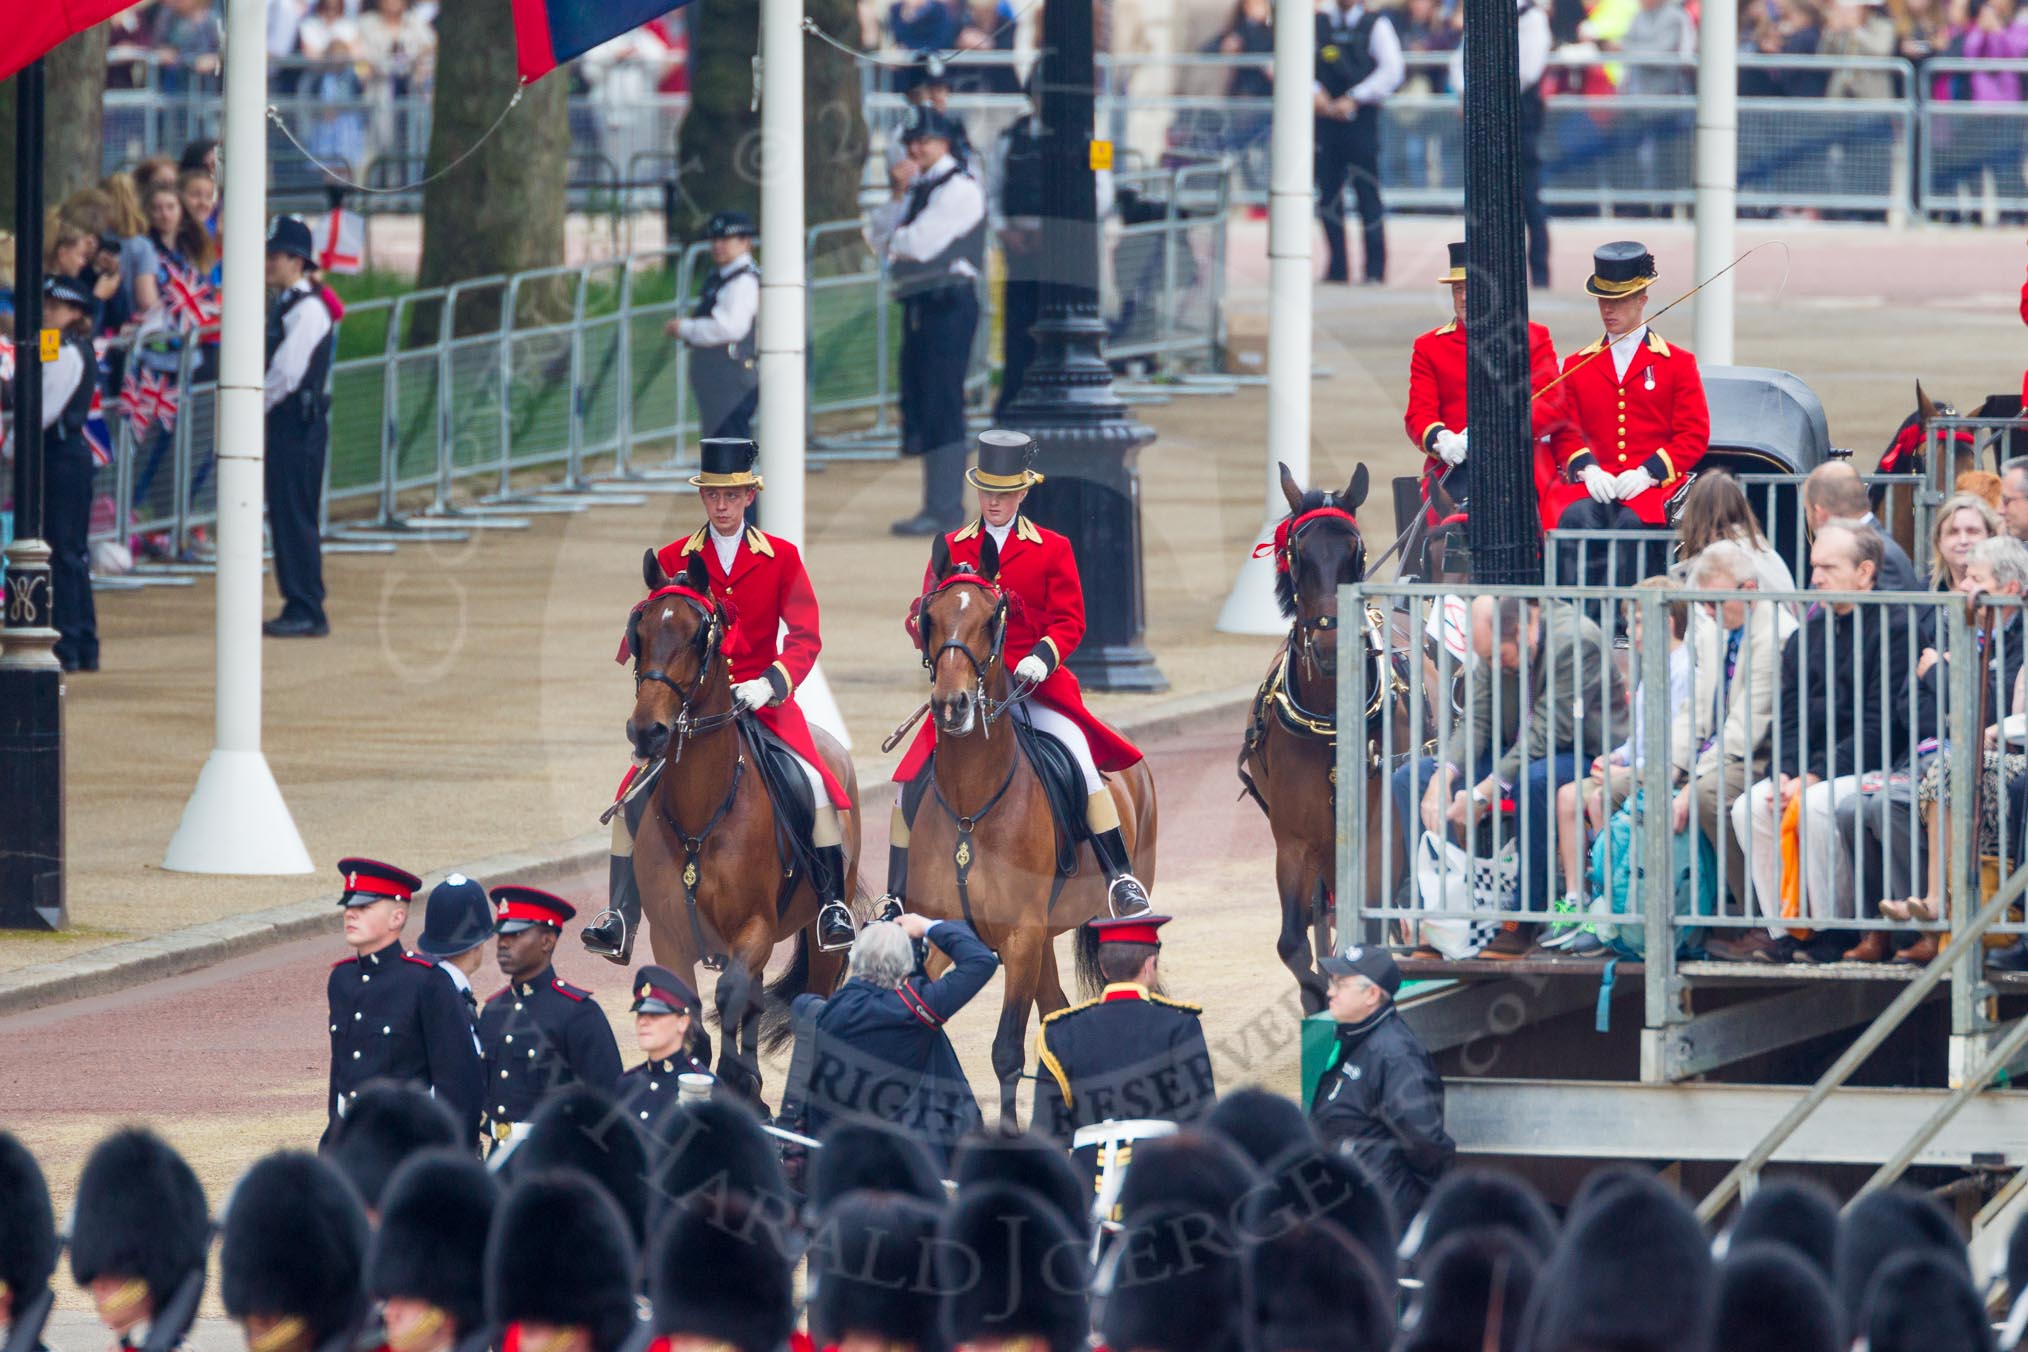 The Colonel's Review 2016.
Horse Guards Parade, Westminster,
London,

United Kingdom,
on 04 June 2016 at 10:50, image #128